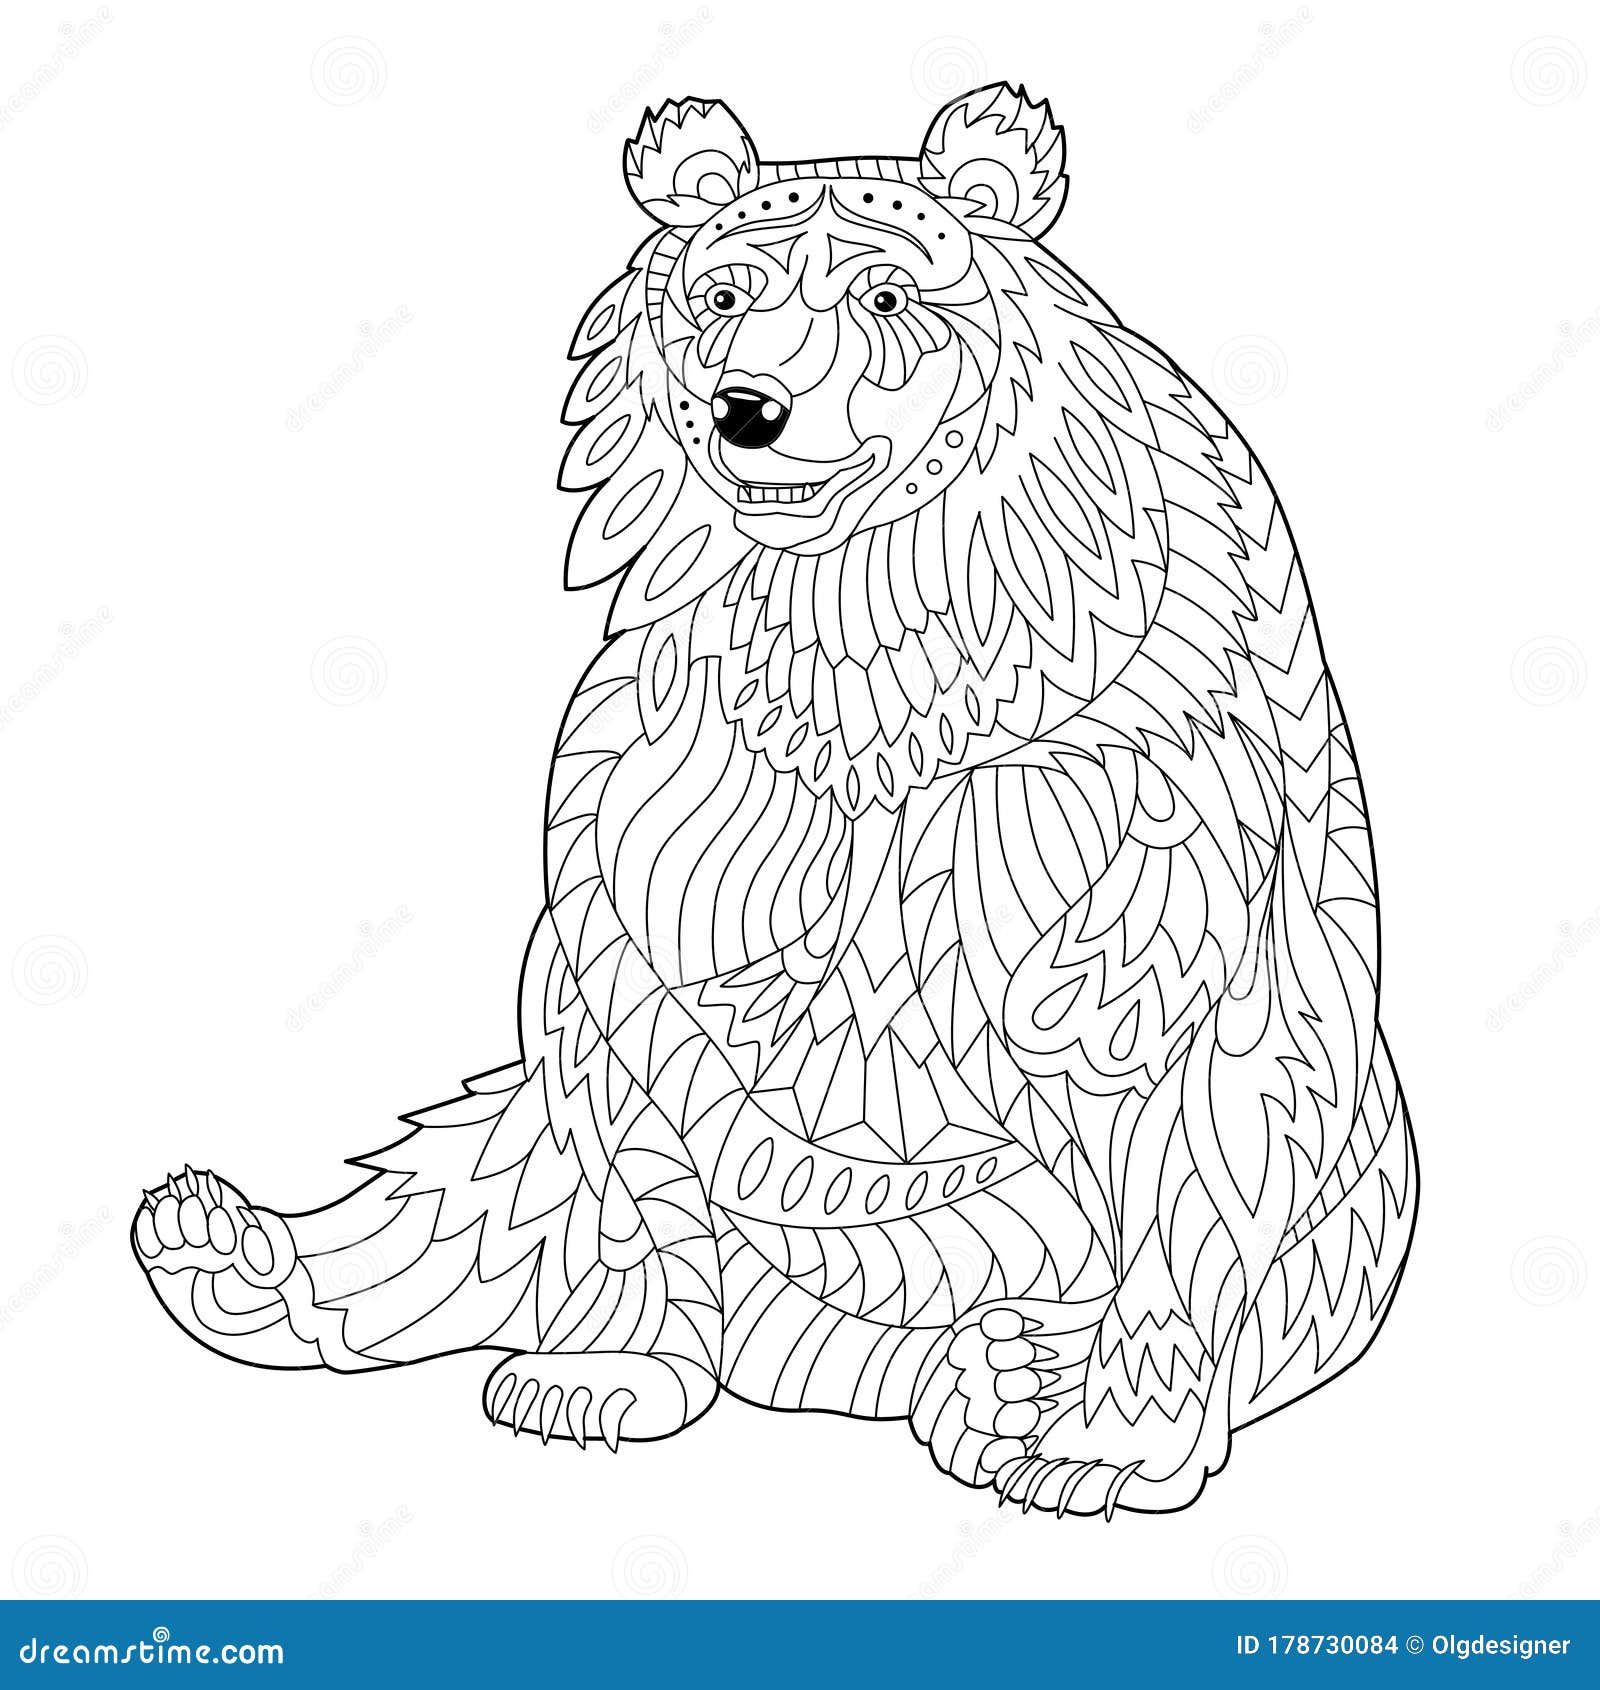 Bear Coloring Page For Adult And Children Stock Vector - Illustration